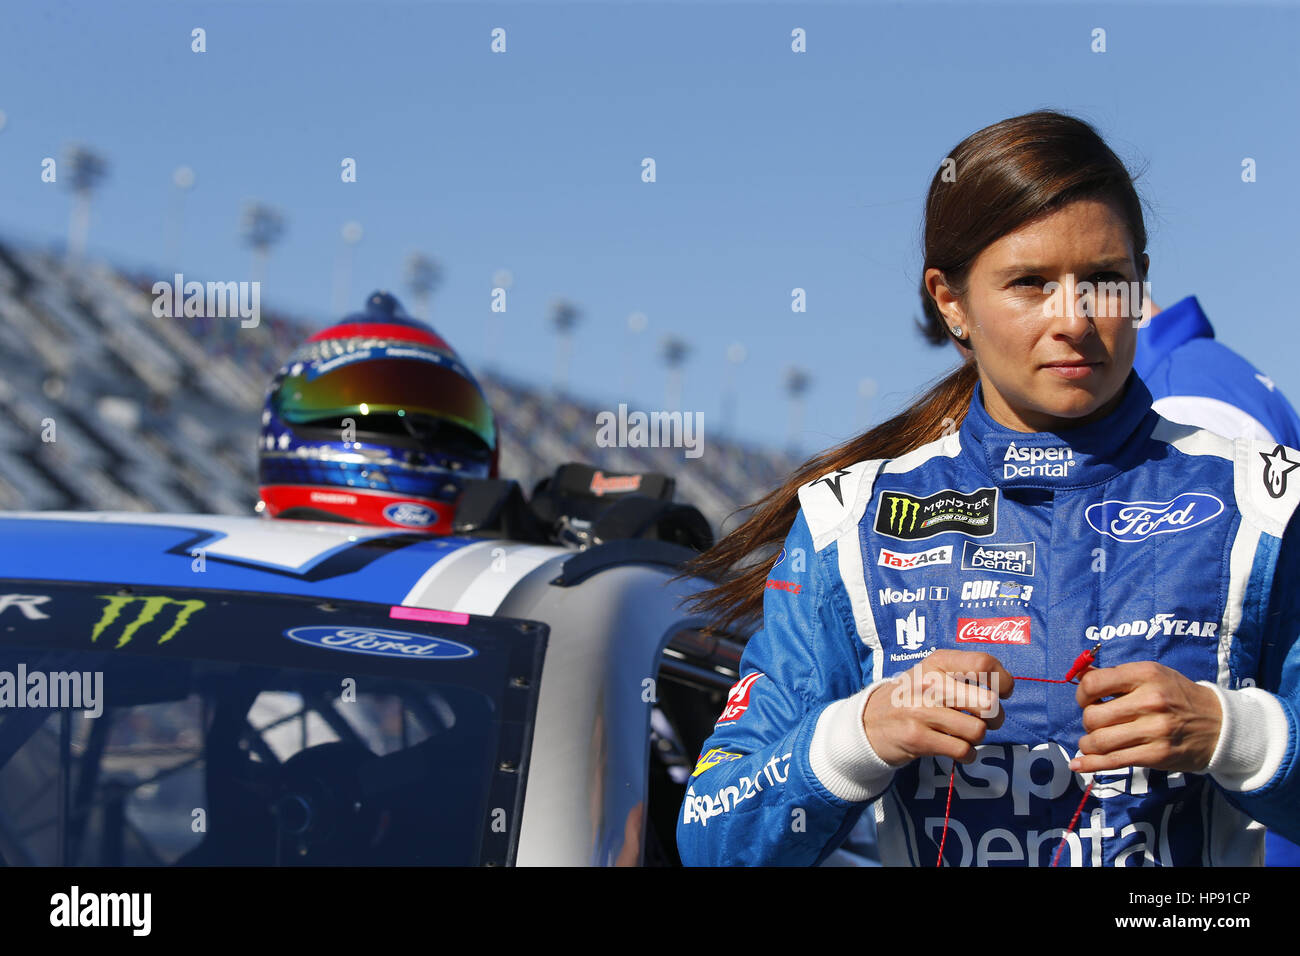 Daytona Beach, Florida, USA. 19th Feb, 2017. February 19, 2017 - Daytona Beach, Florida, USA: Danica Patrick (10) gets suited up on pit road prior to the Monster Energy NASCAR Cup Series teams taking to the track to qualify for the Daytona 500 at Daytona International Speedway in Daytona Beach, Florida. Credit: Justin R. Noe Asp Inc/ASP/ZUMA Wire/Alamy Live News Stock Photo